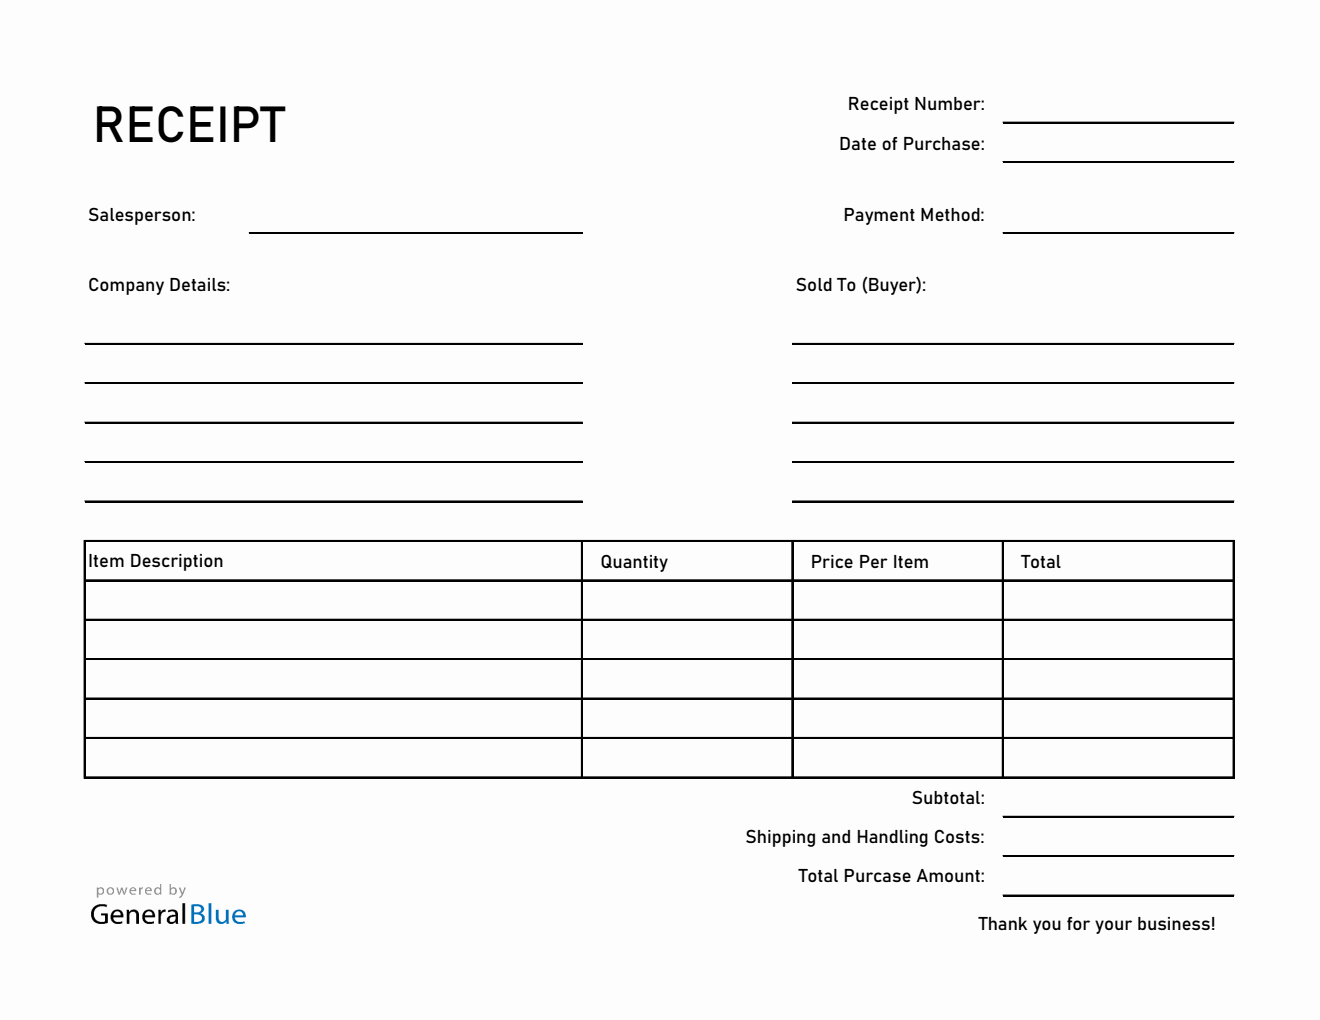 Basic Receipt Template in Excel